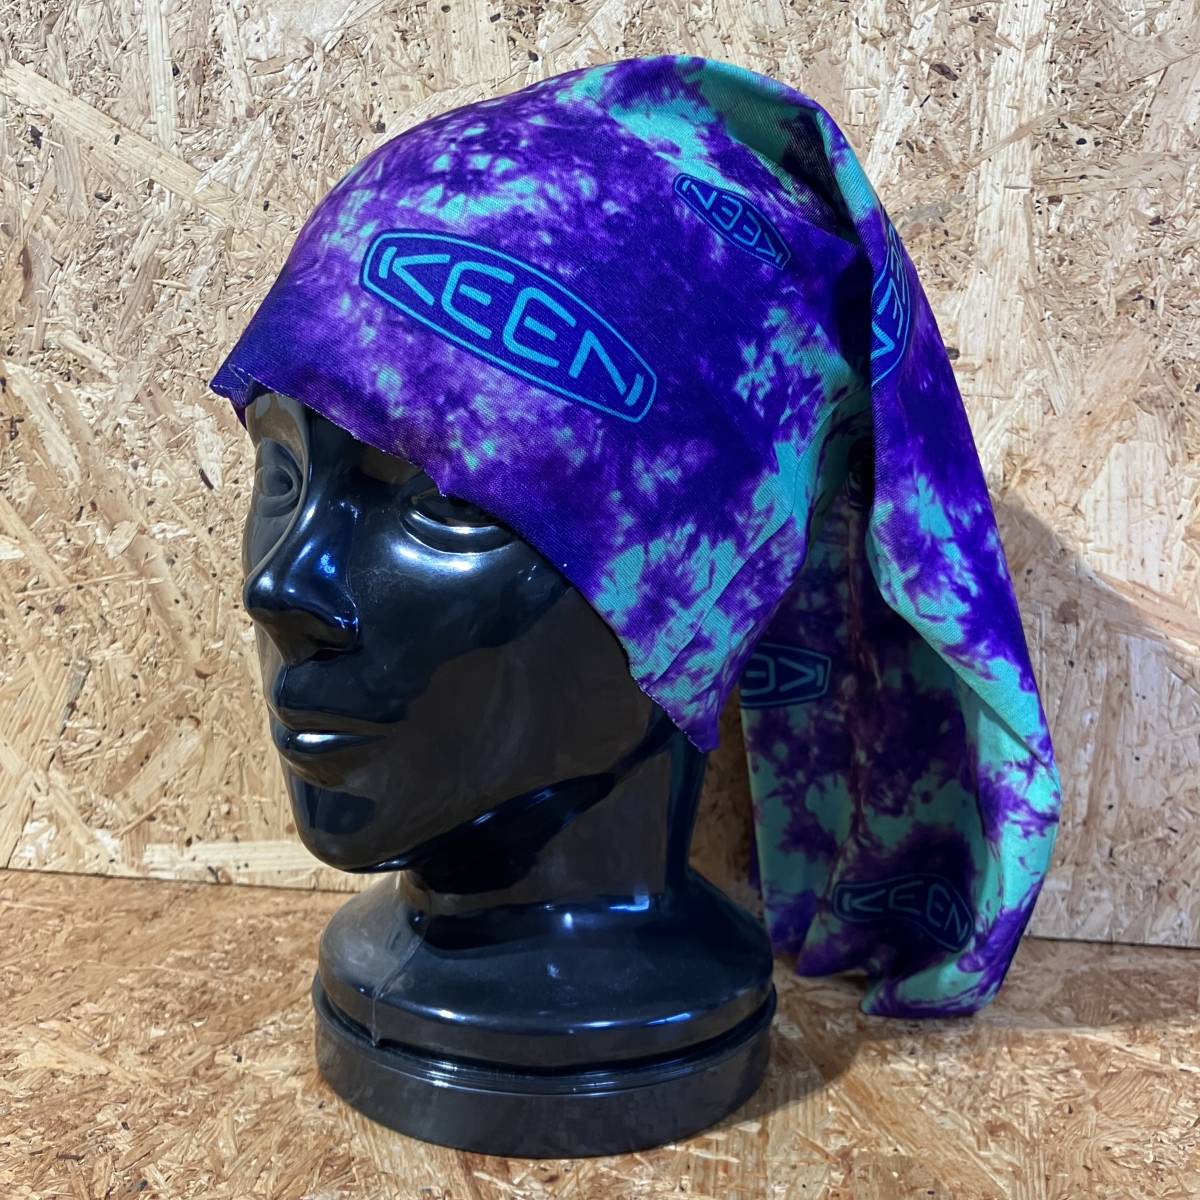 KEEN key n bandana snood neck warmer hair band neck gator not for sale NOT FOR SALE